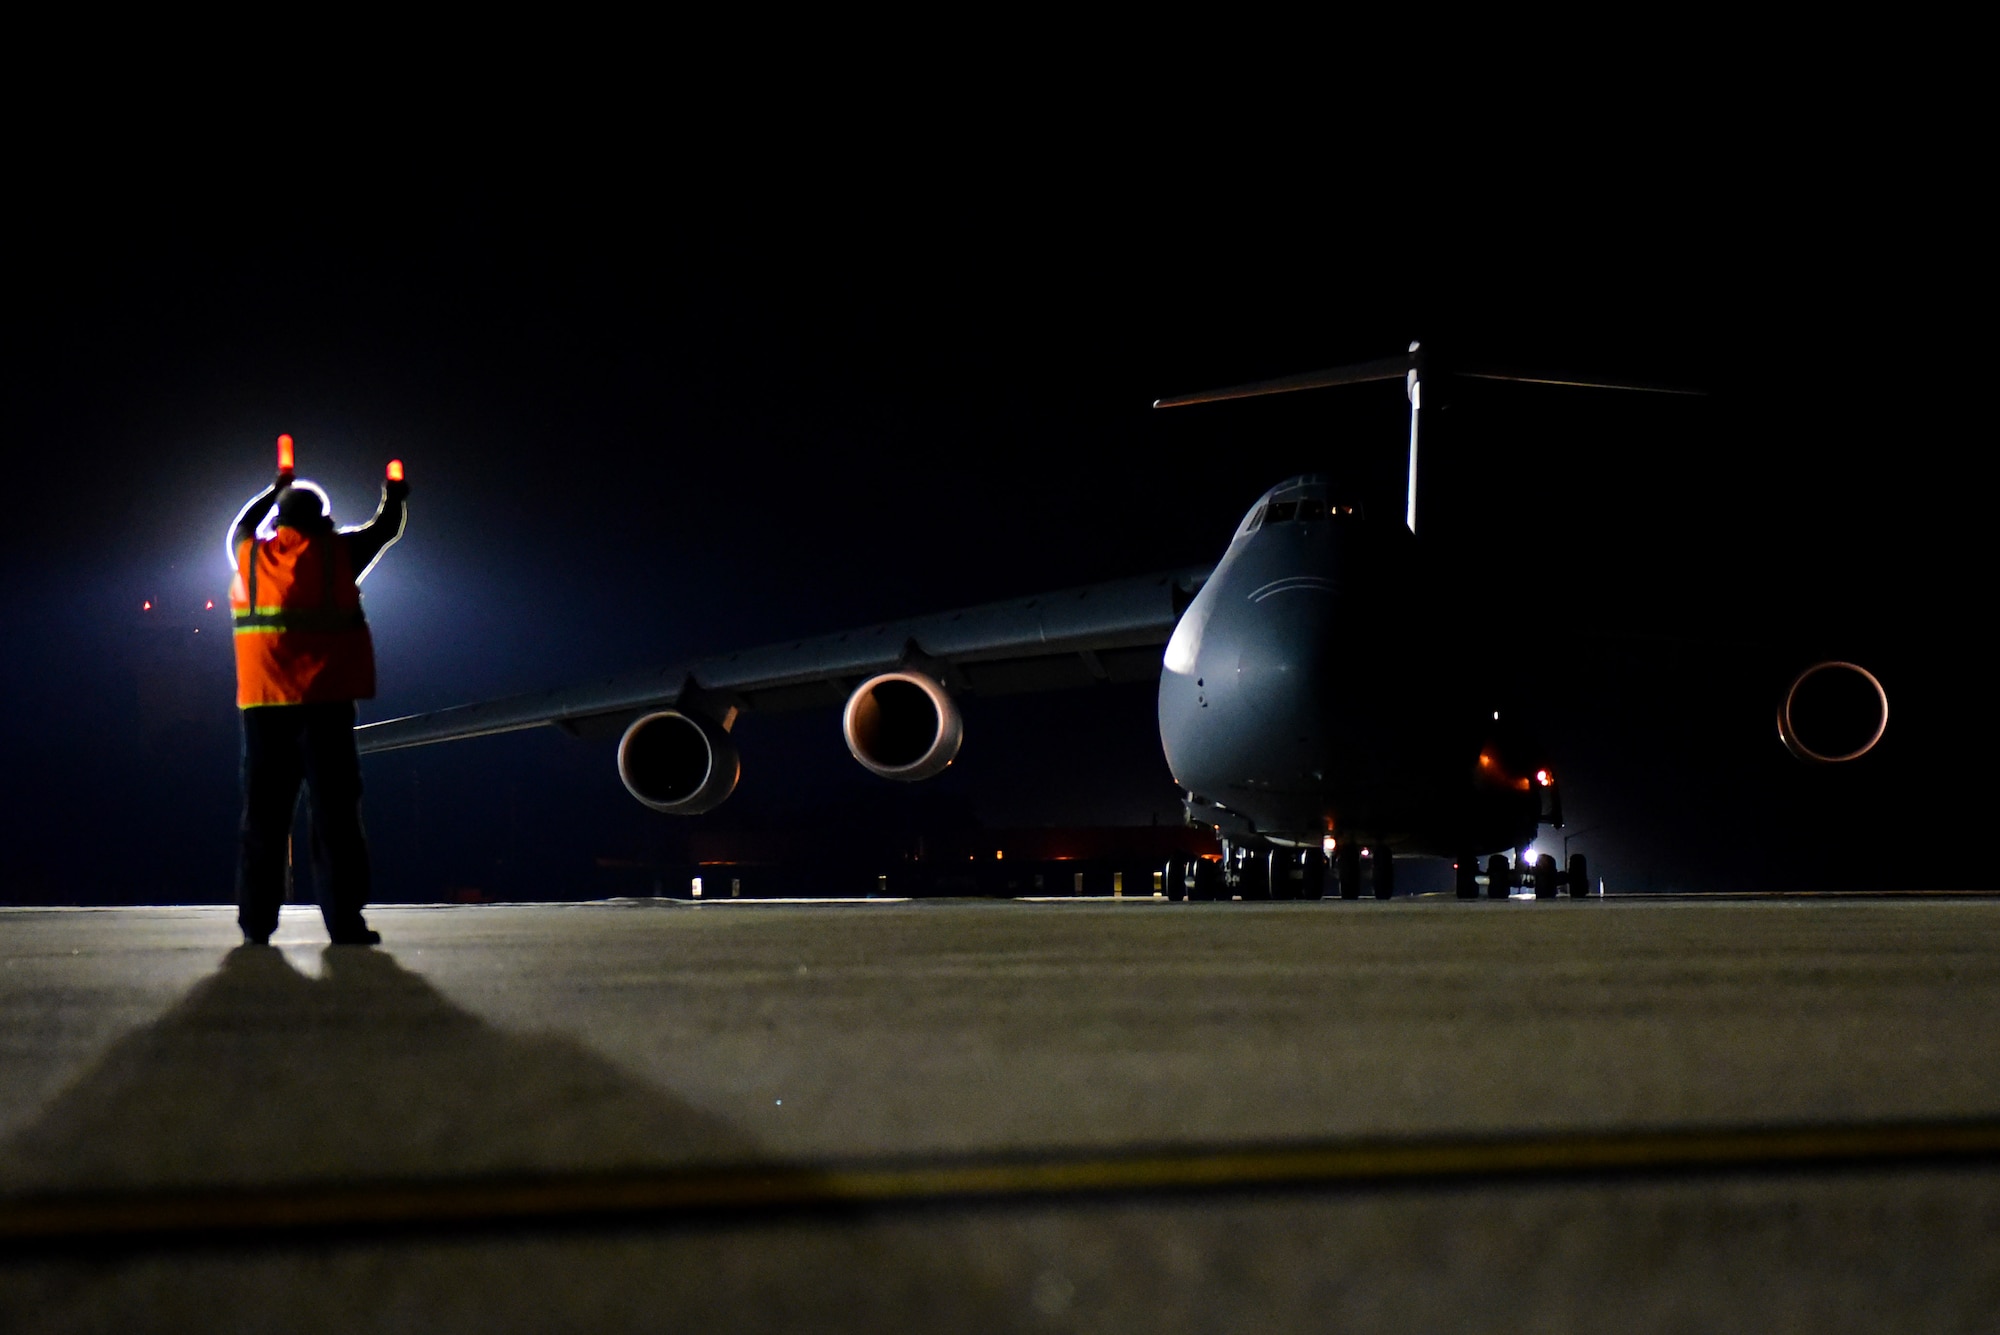 Eddie Holmes, 4th Equipment Maintenance Squadron transit alert aircraft servicer, marshals a taxiing C-5M Super Galaxy, Sept. 29, 2017, at Seymour Johnson Air Force Base, North Carolina. The Super Galaxy is assigned to Dover Air Force Base, Delaware. (U.S. Air Force photo by Airman 1st Class Victoria Boyton)